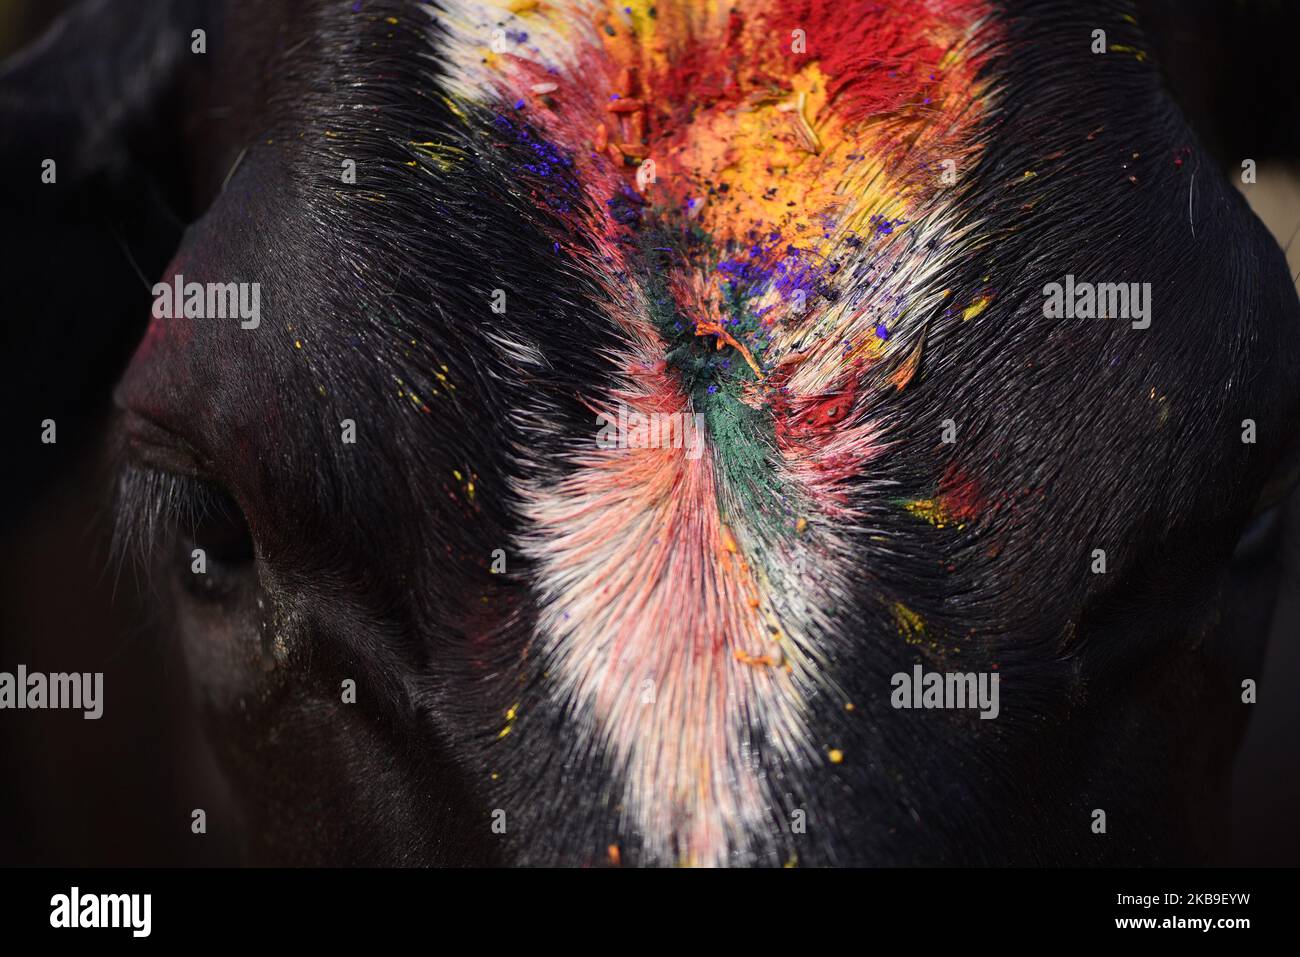 A close up view of patterns of colors in head of a cow during Tihar or Deepawali and Diwali celebrations at Kathmandu, Nepal on Monday, October 28, 2019. Tihar is a hindu festival celebrated in Nepal for 5 days. Cows are considered to be the incarnation of the Hindu god of wealth, Lord Laxmi. Nepalese devotees decorate the cows with marigold flower garlands and colored powders and offer the cows fresh fruits and vegetables. (Photo by Narayan Maharjan/NurPhoto) Stock Photo